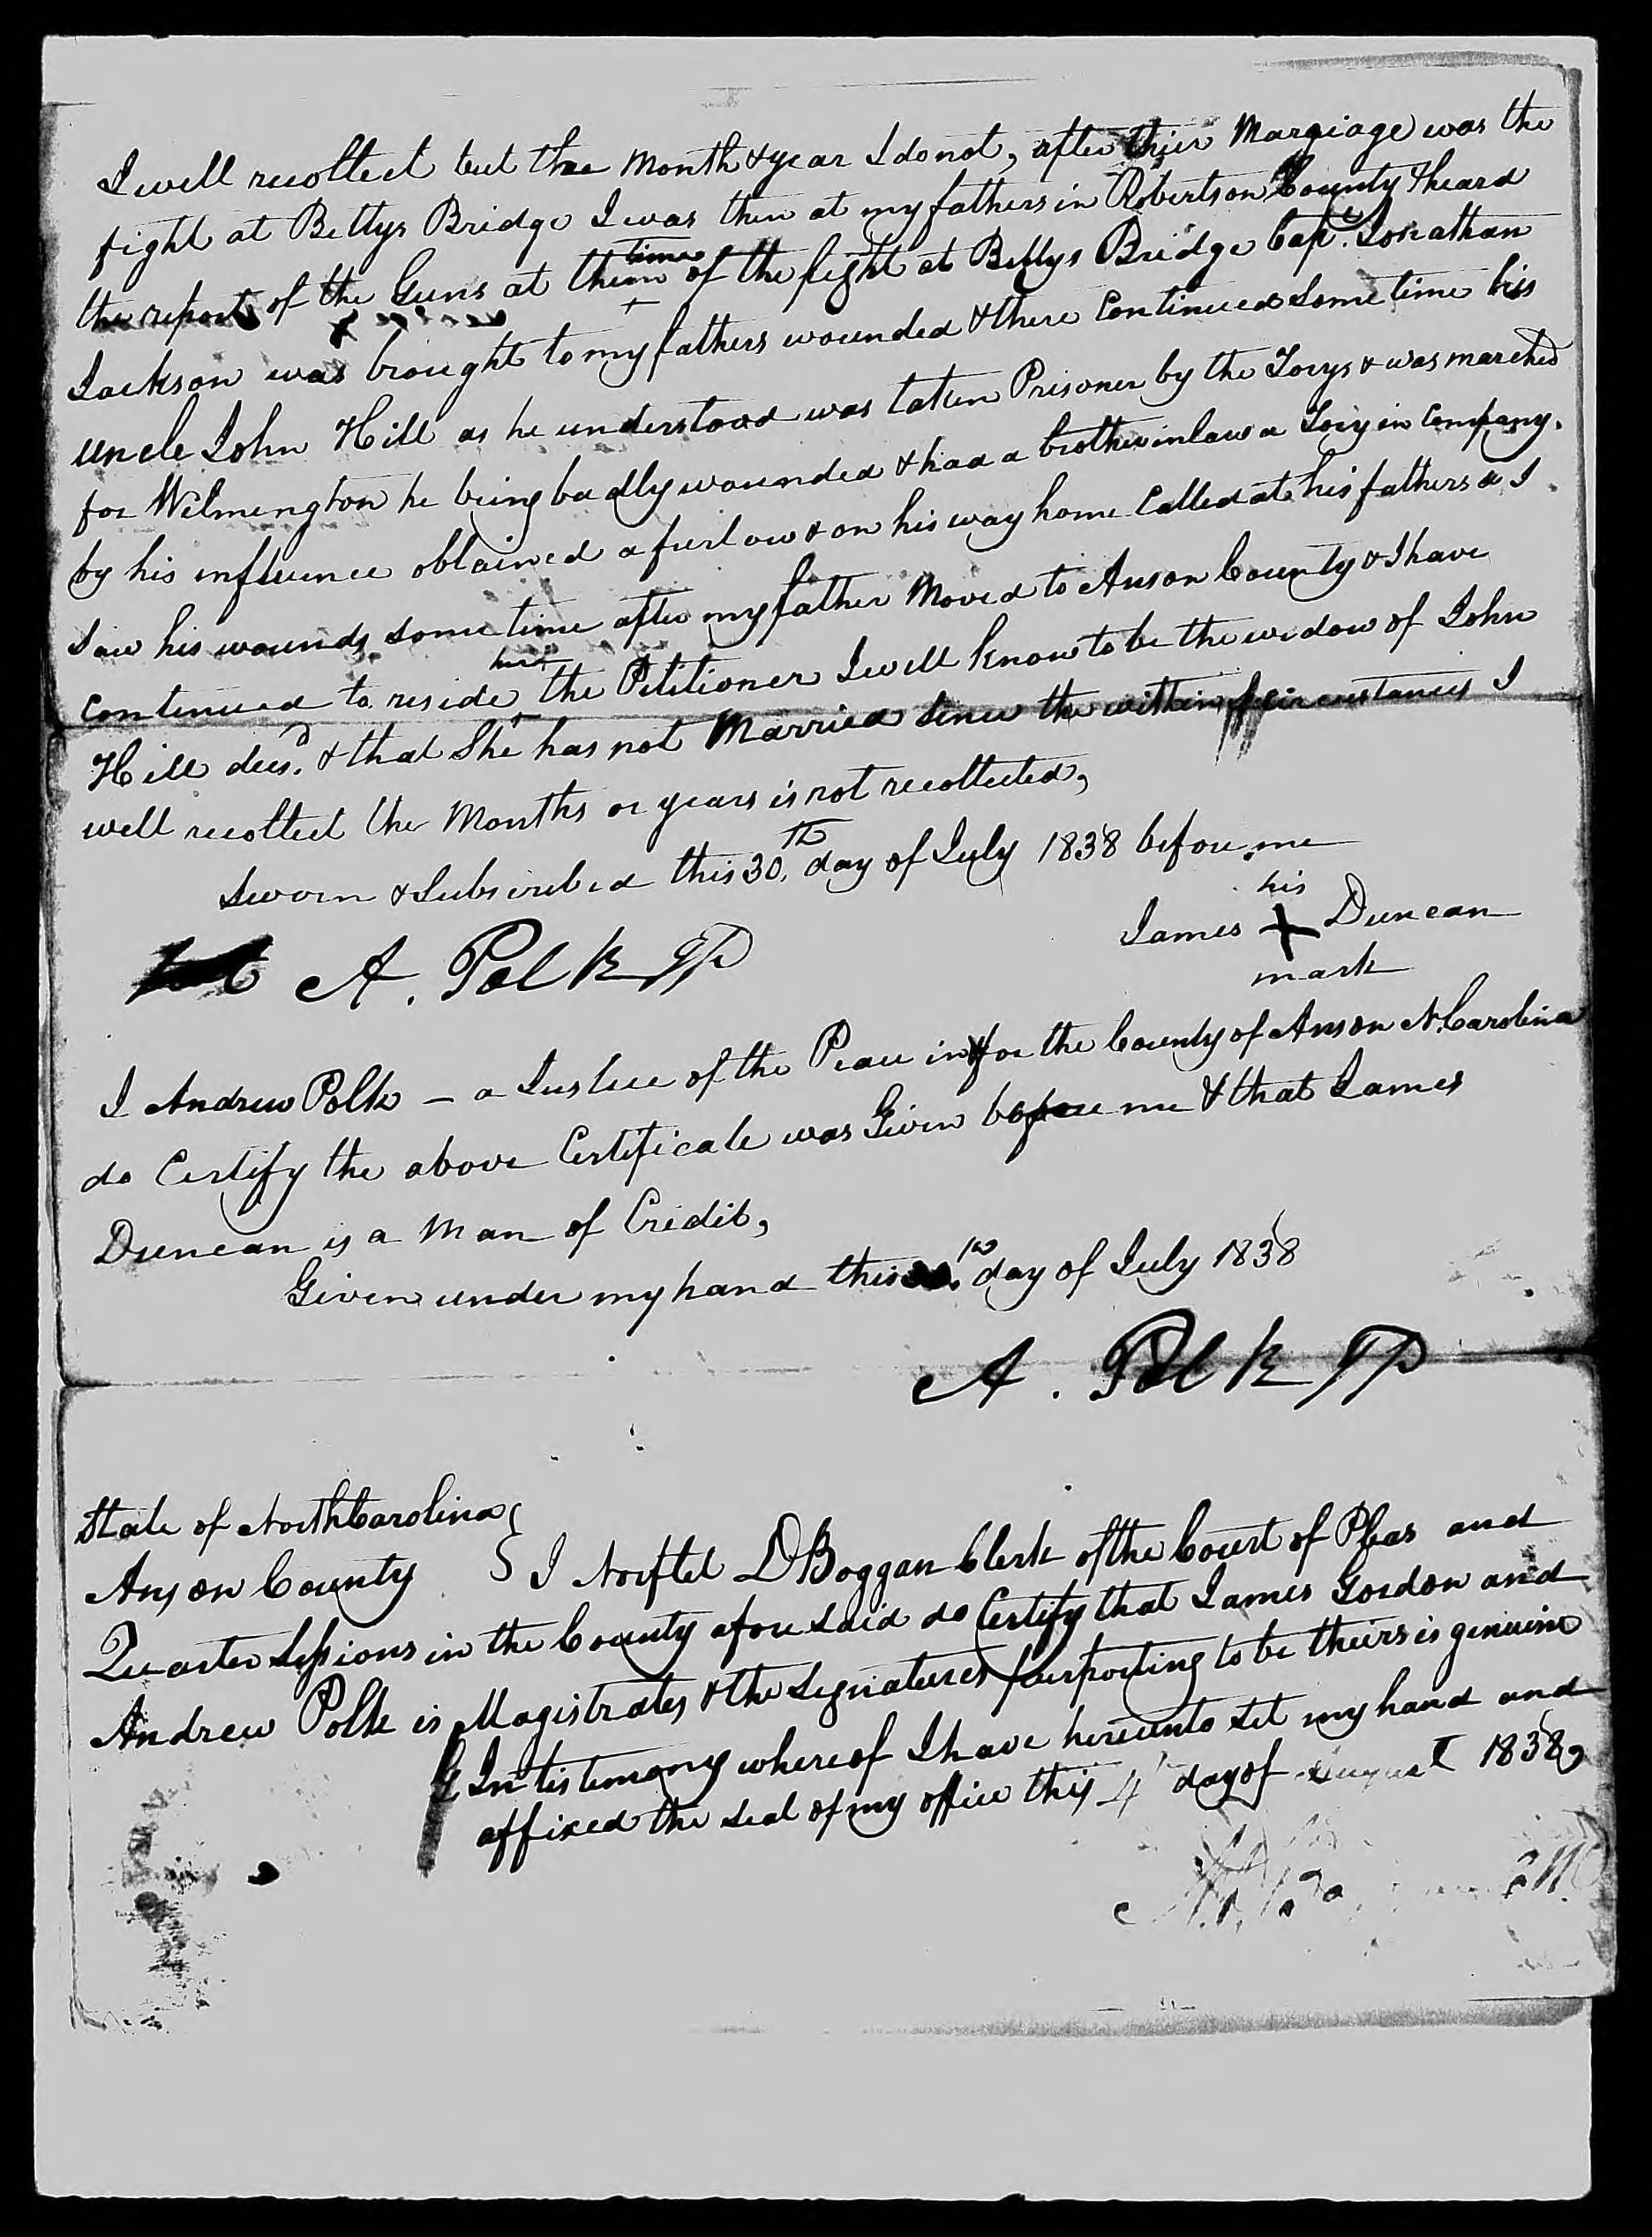 Affidavit of James Duncan in support of a Pension Claim for Huldah Hill, 30 July 1838, page 2